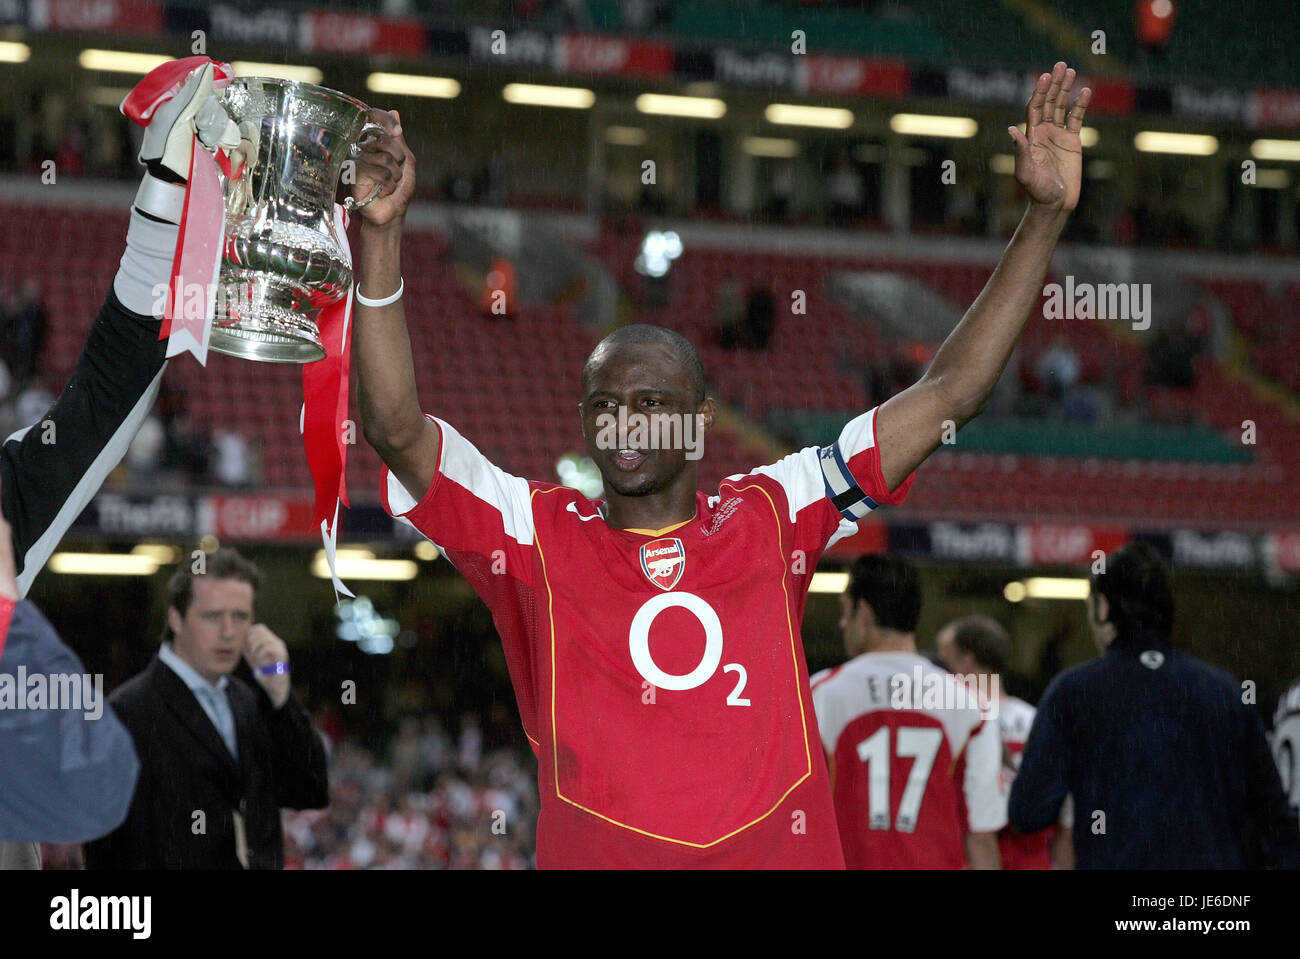 PATRICK VIEIRA WITH F.A. CUP ARSENAL V MANCHESTER UNITED MILLENNIUM STADIUM CARDIFF WALES 21 May 2005 Stock Photo